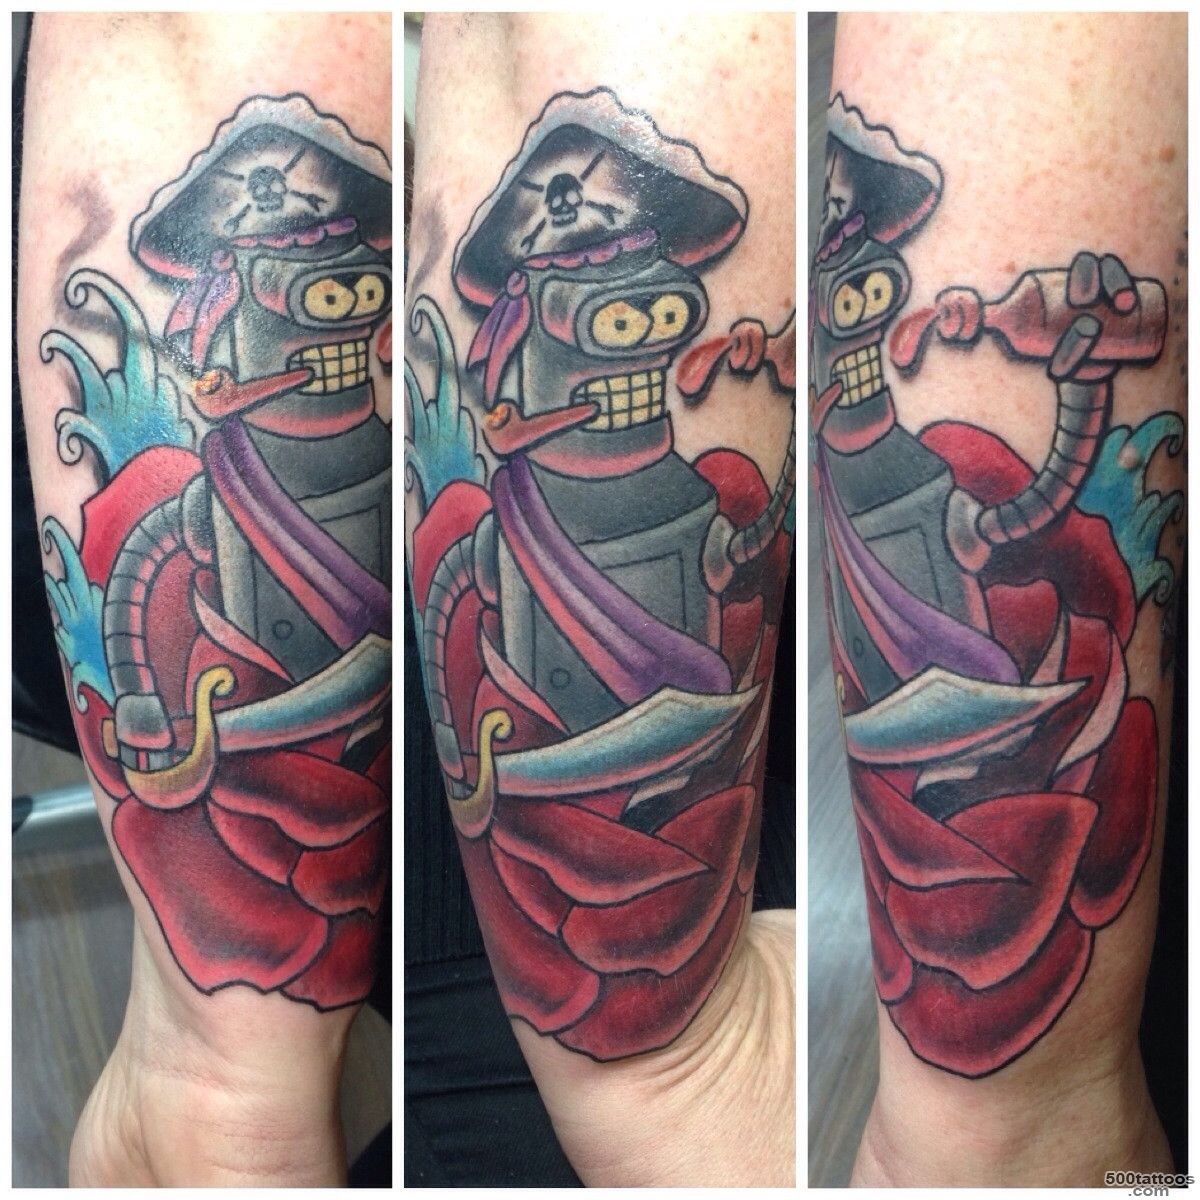 Pirate Bender forearm tattoo by Sam Rivers, Curiosities, Ipswich ..._24